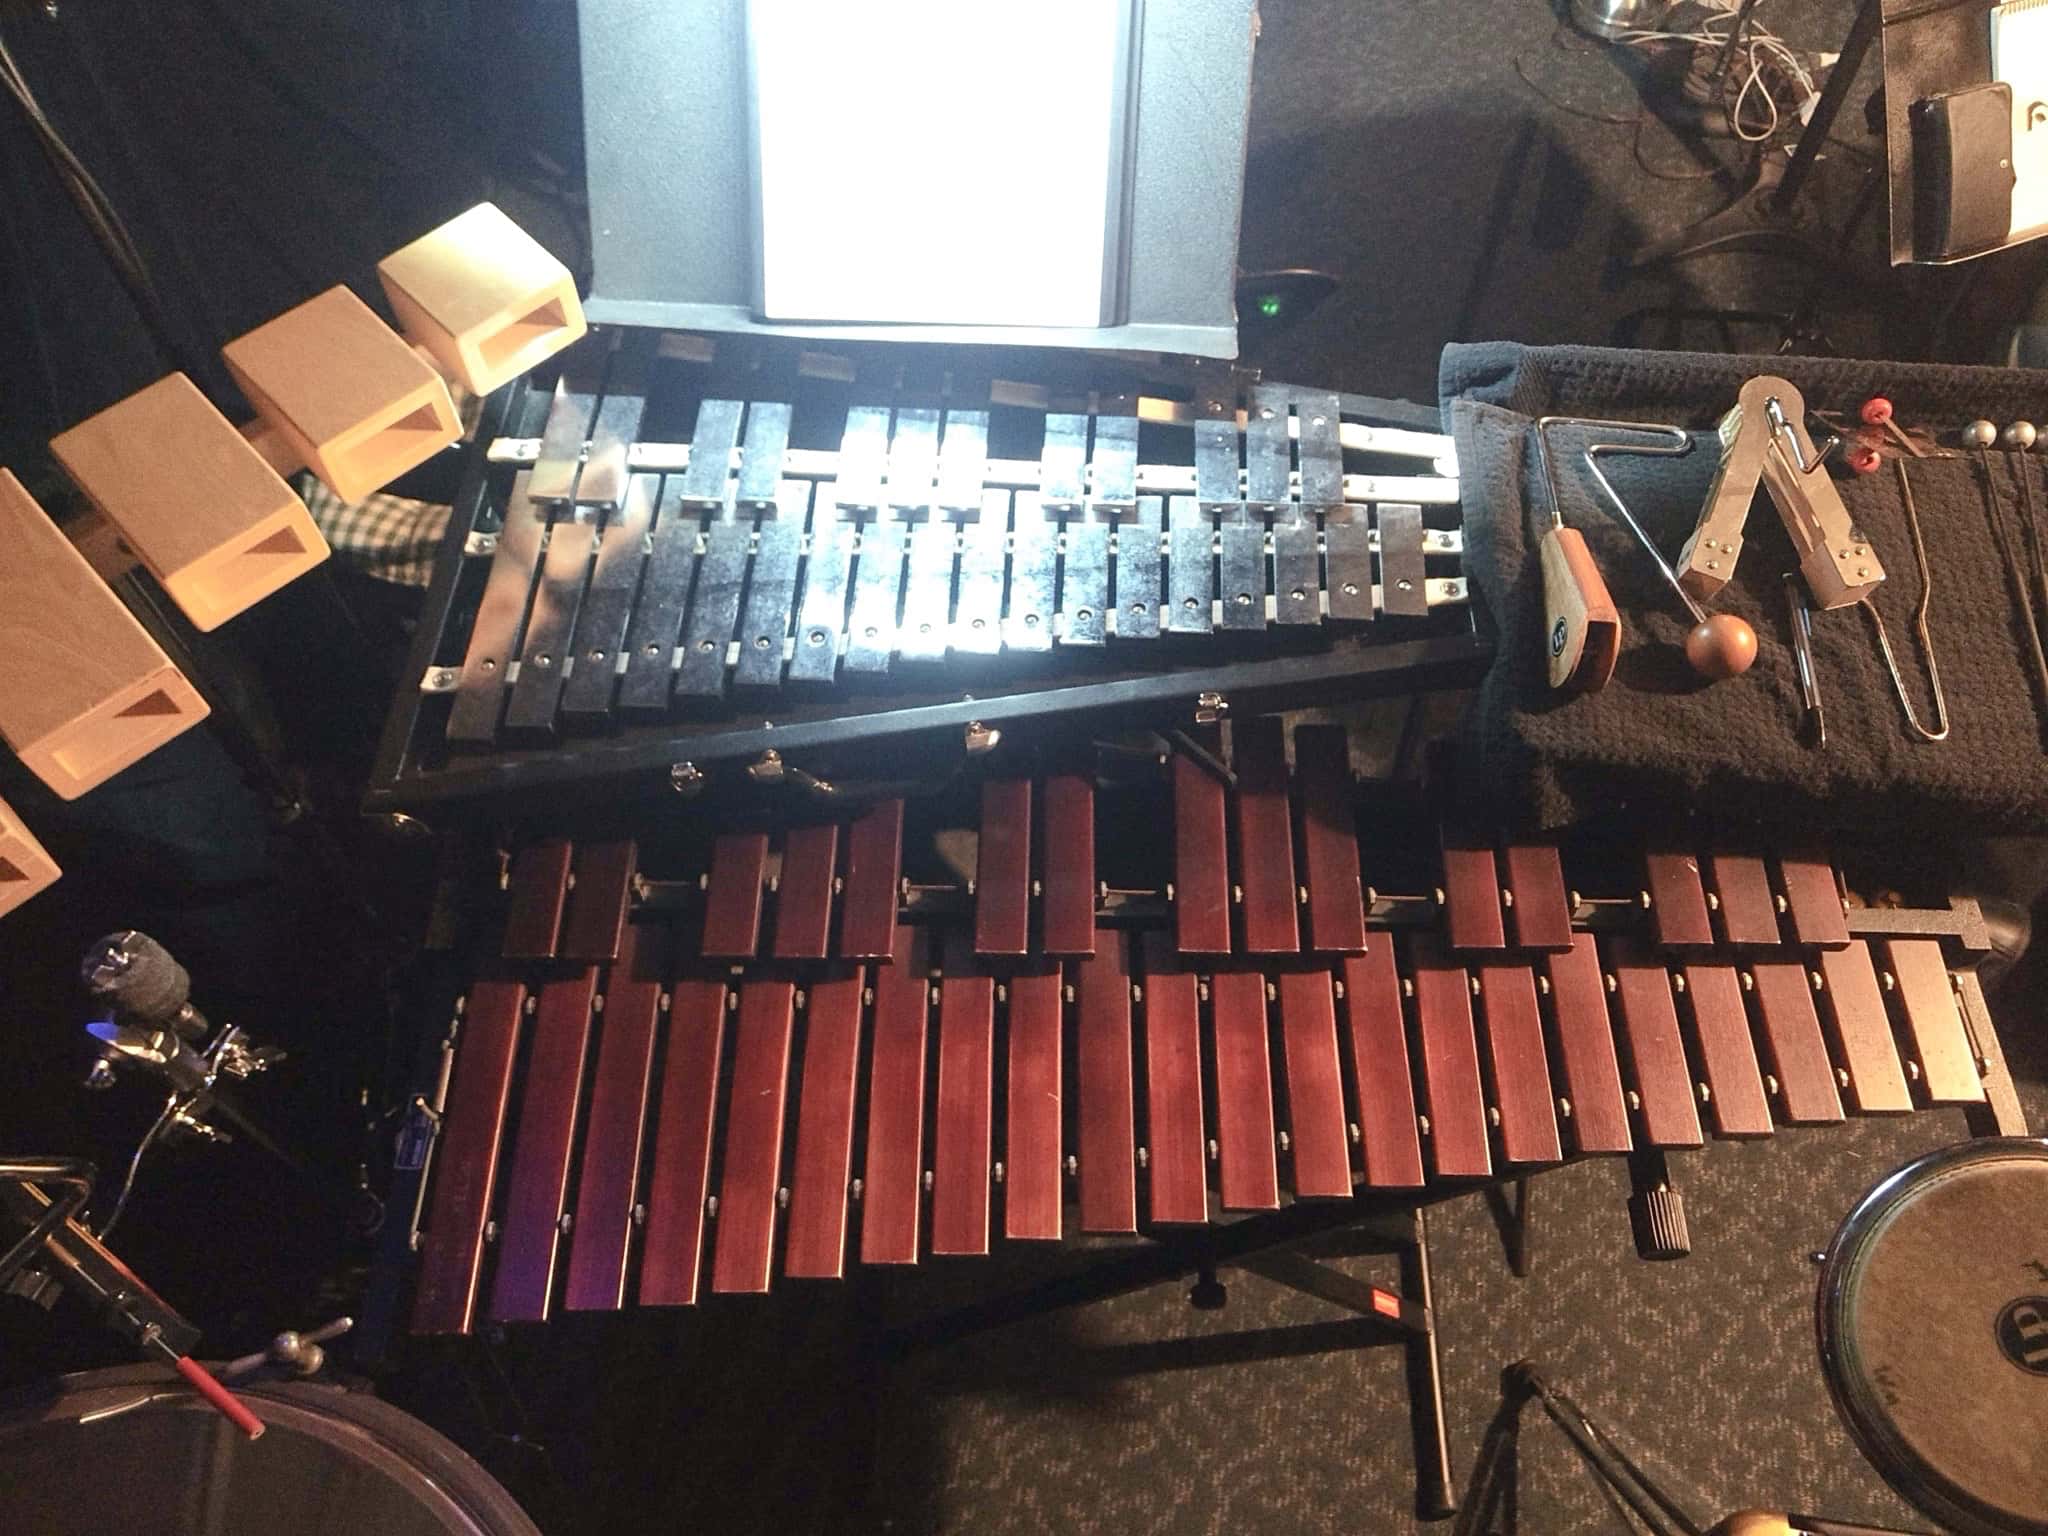 Will Marinelli's percussion setup for the Musical Elf at the Algonquin Theater in Manasquan, New Jersey.